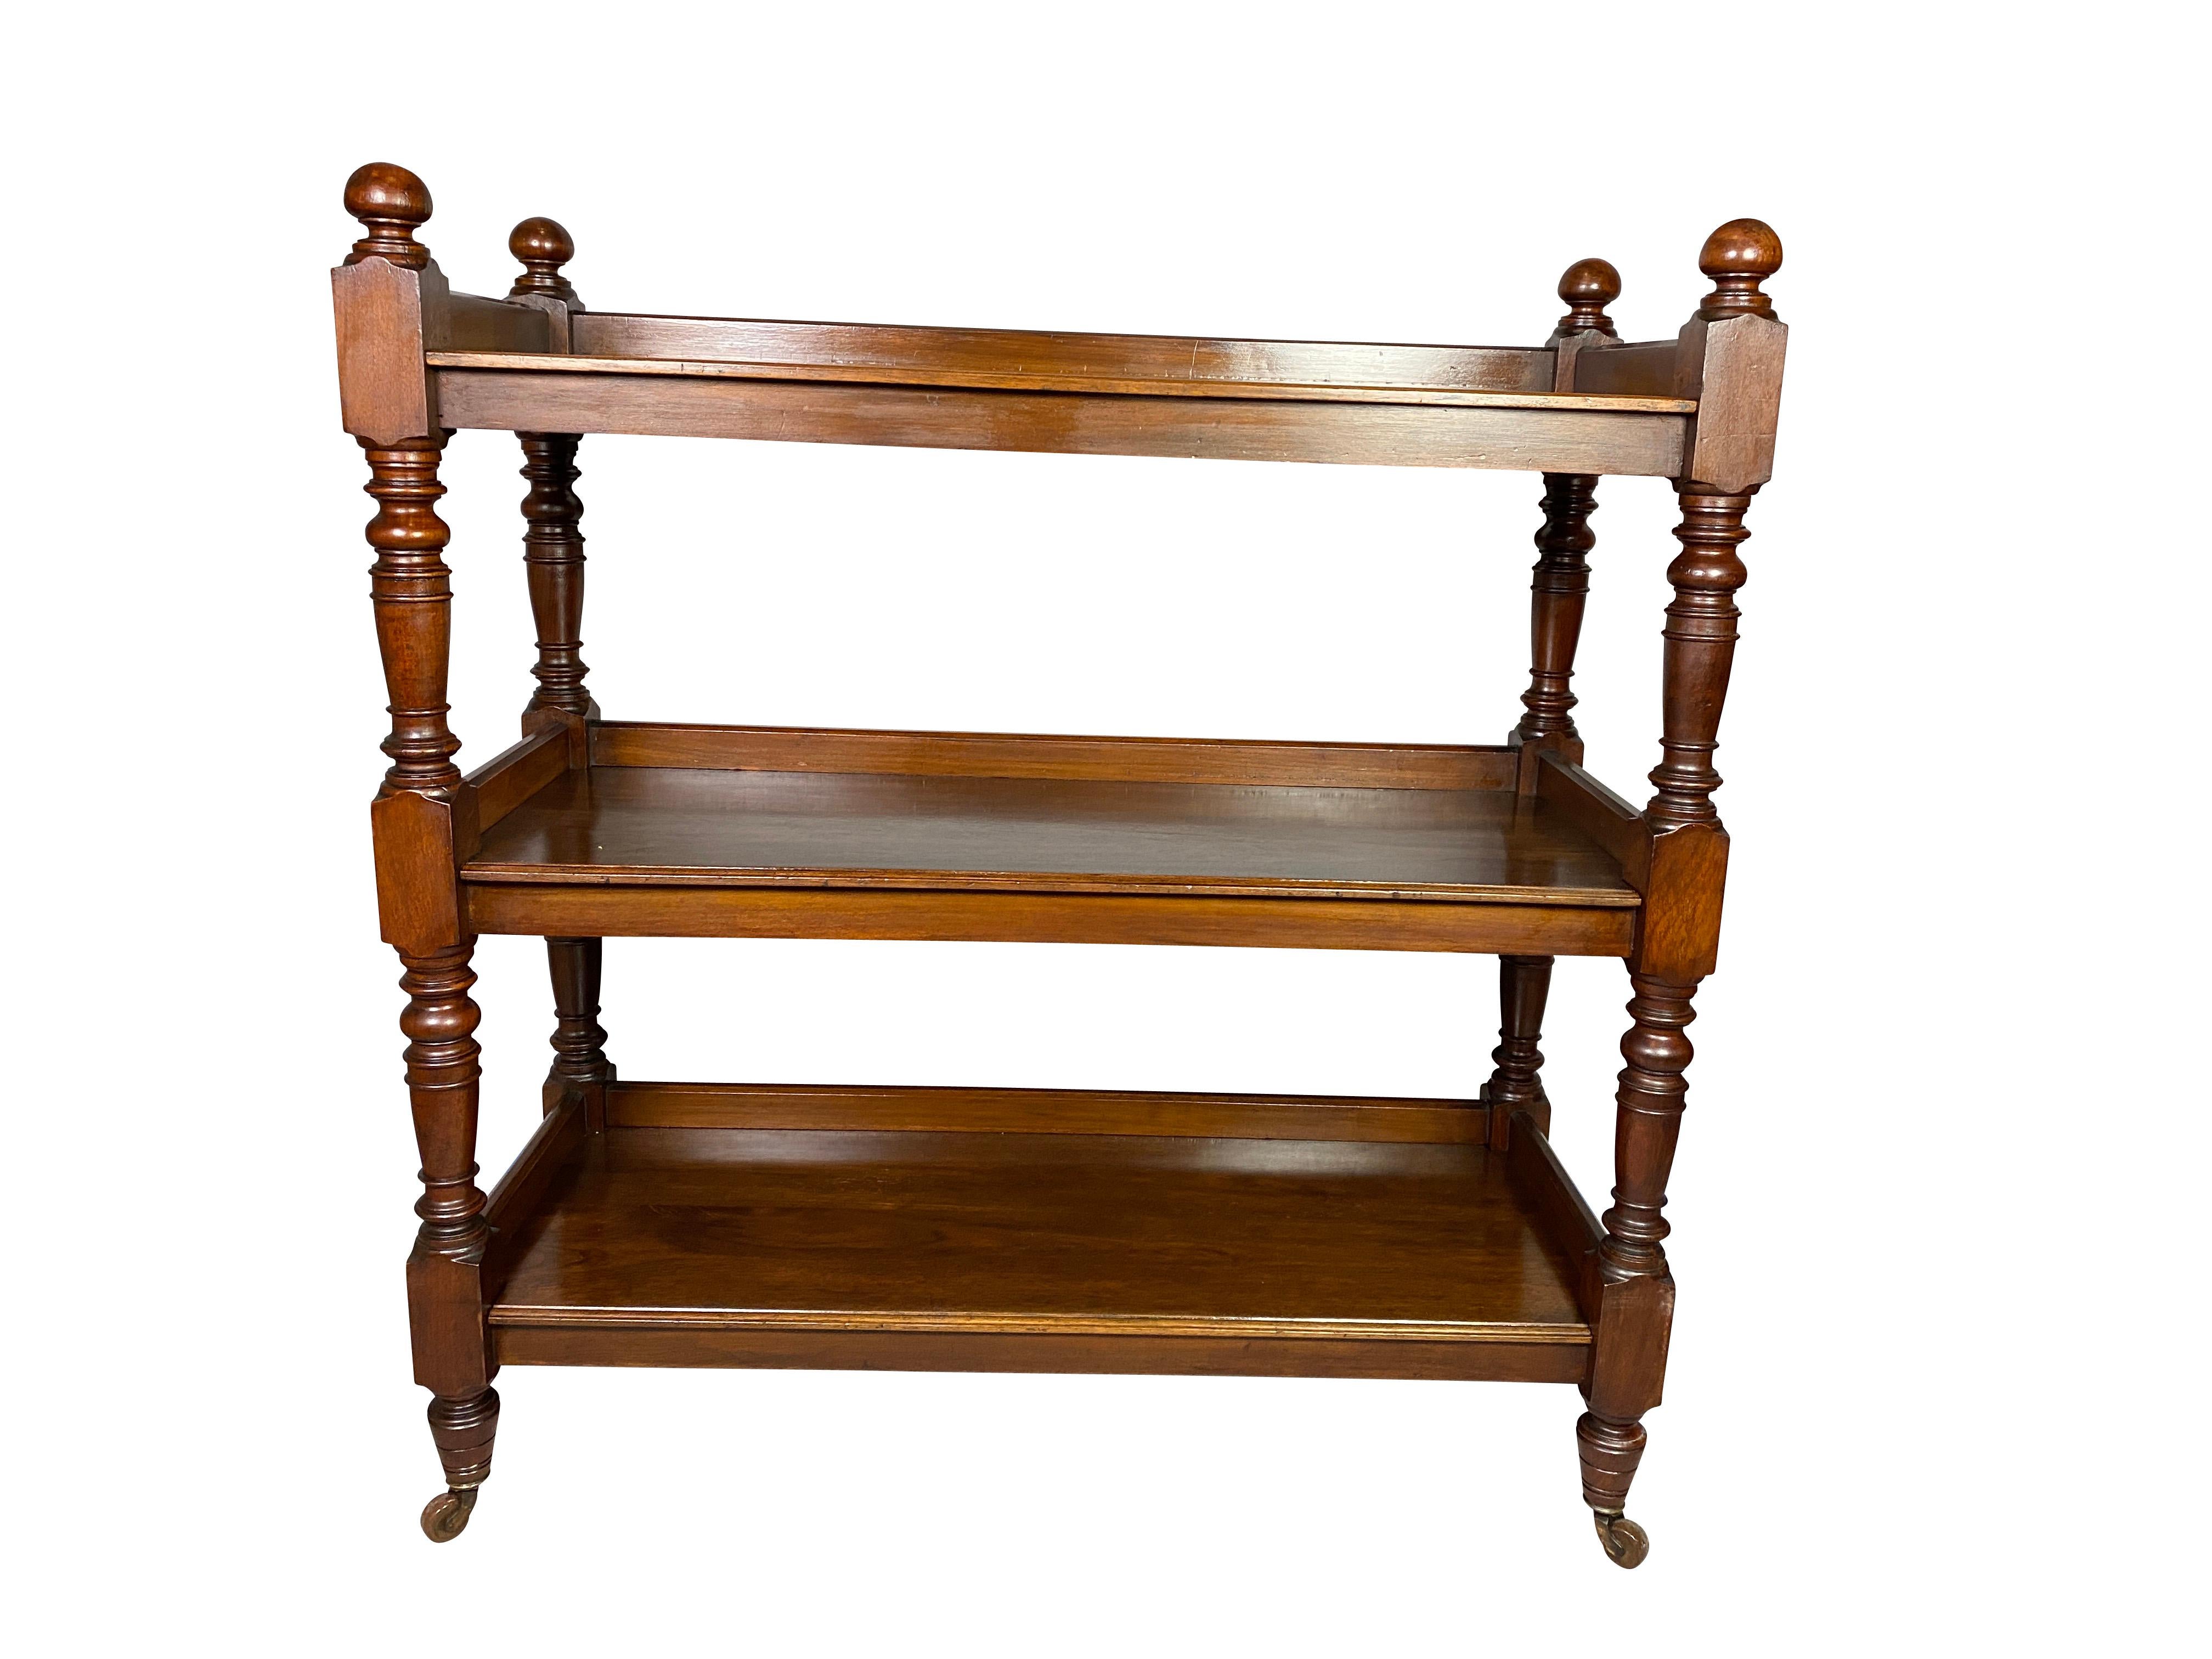 Rectangular top with corner finials over two conforming shelves all raised on turned supports, toupie feet and casters.